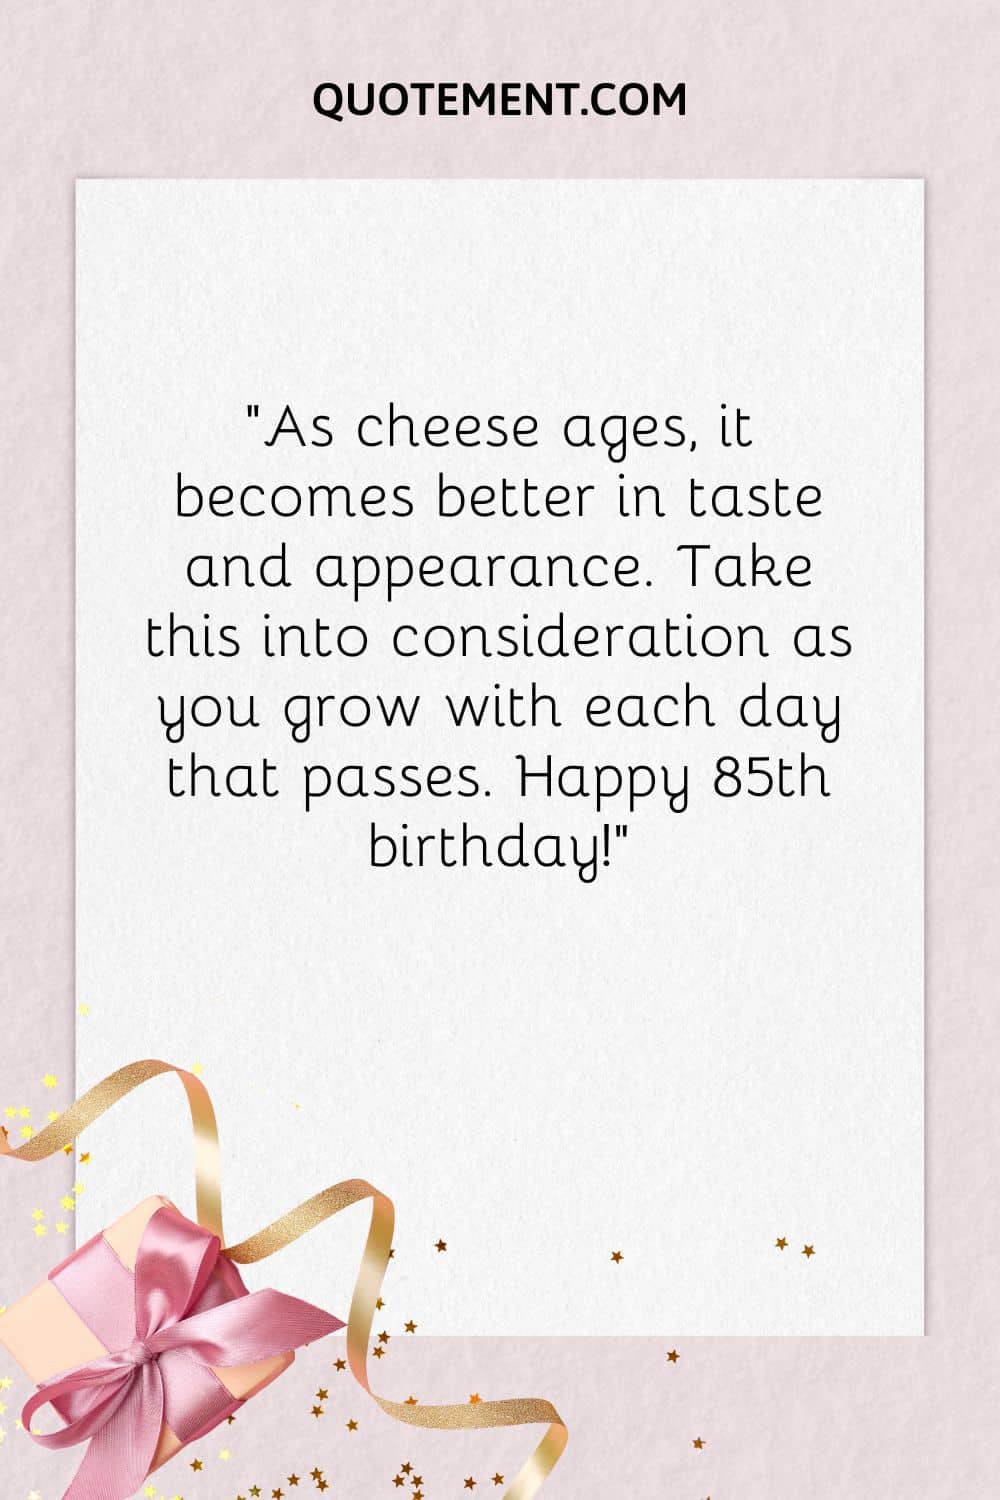 “As cheese ages, it becomes better in taste and appearance. Take this into consideration as you grow with each day that passes. Happy 85th birthday!”